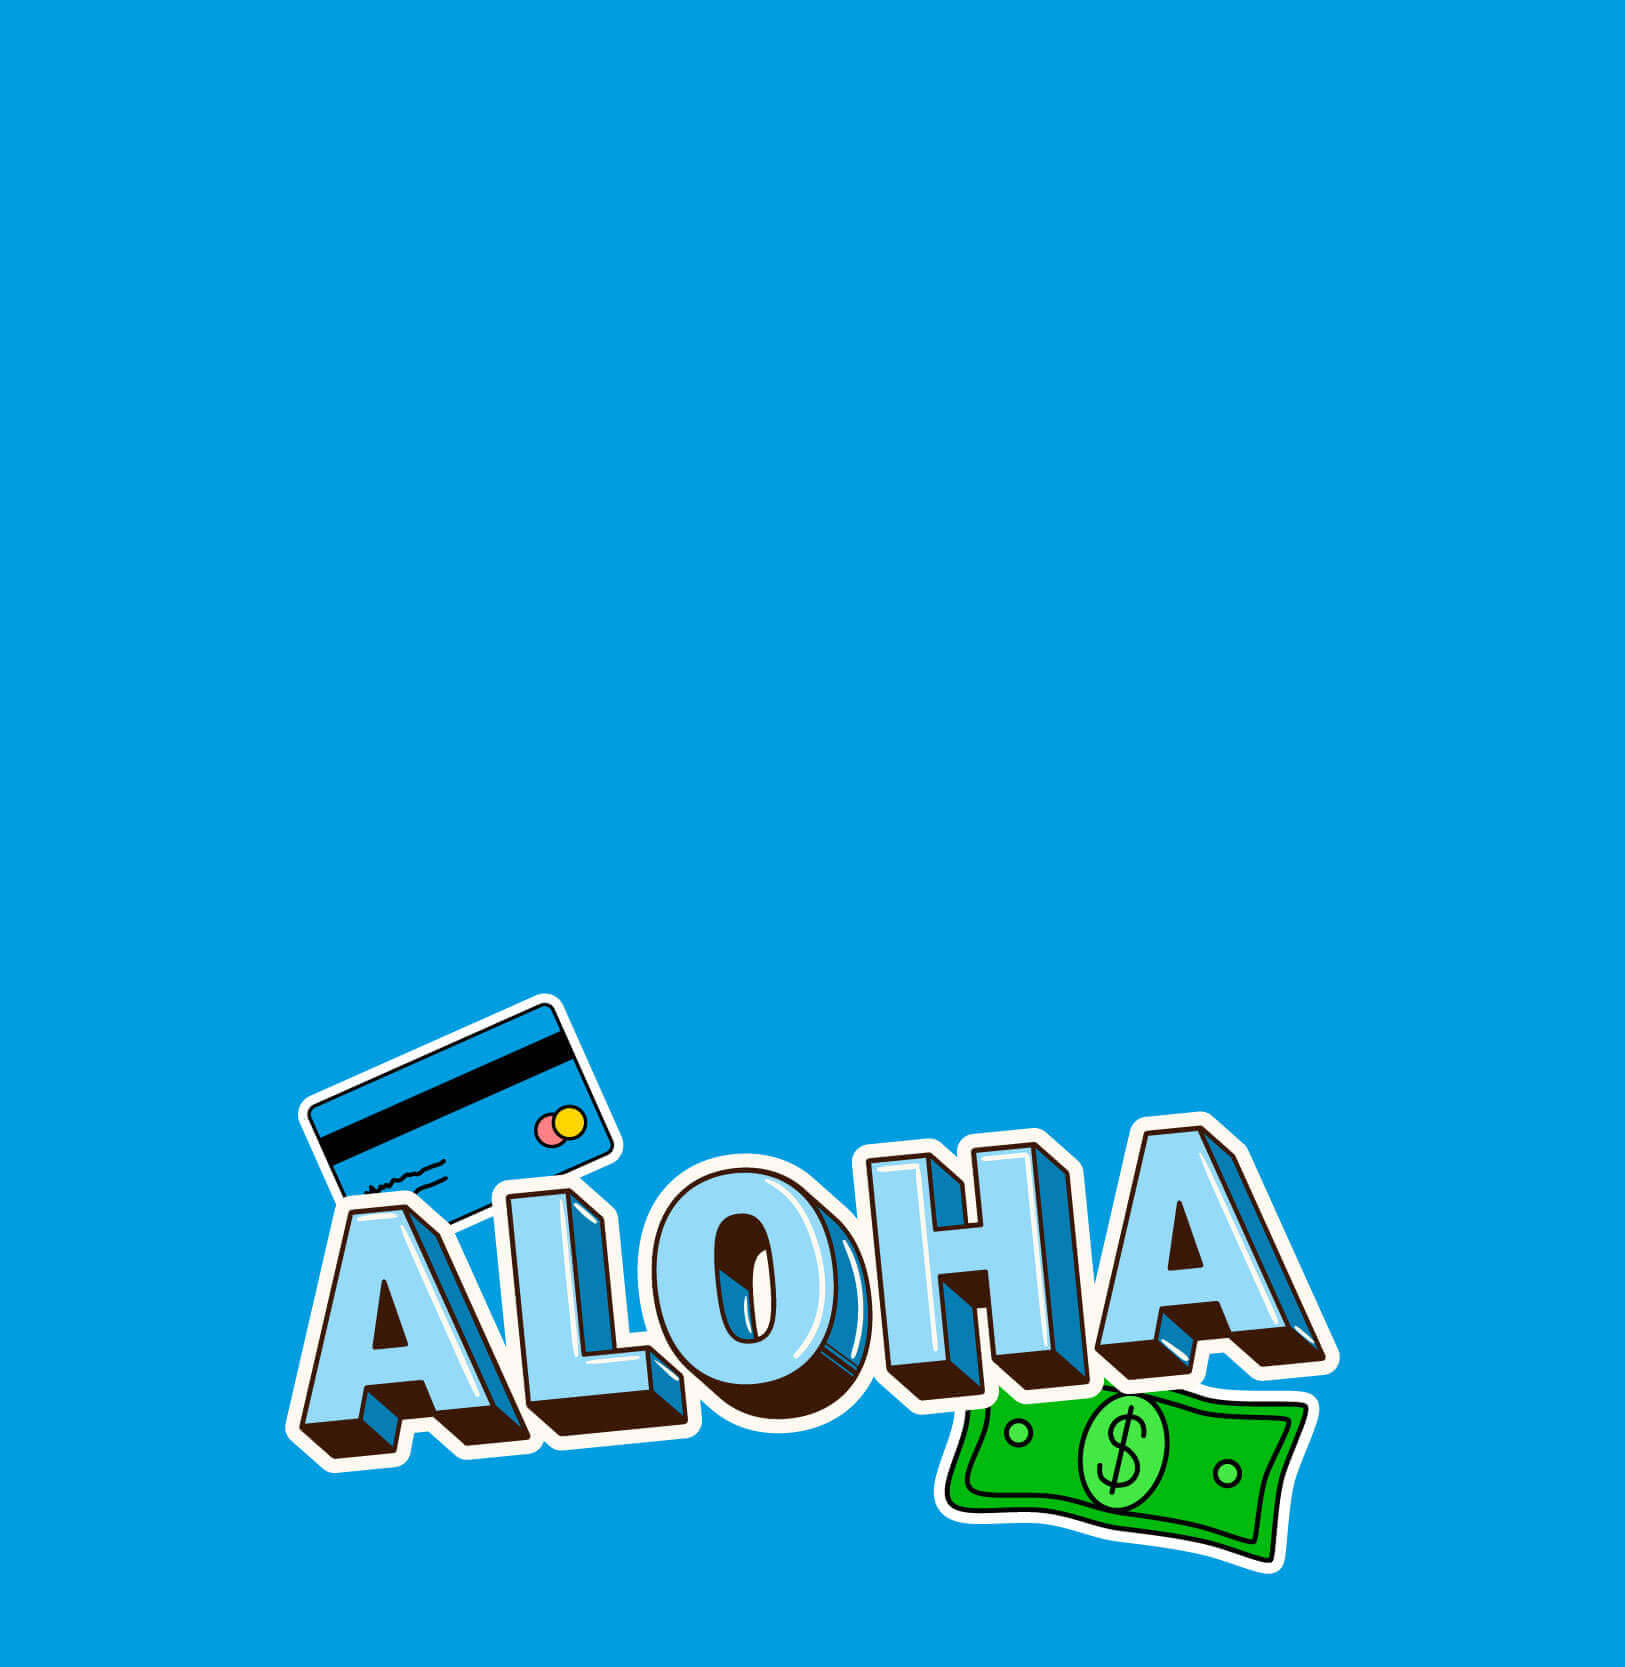 Graphic of the word Aloha with a debit card and money floating behind it.